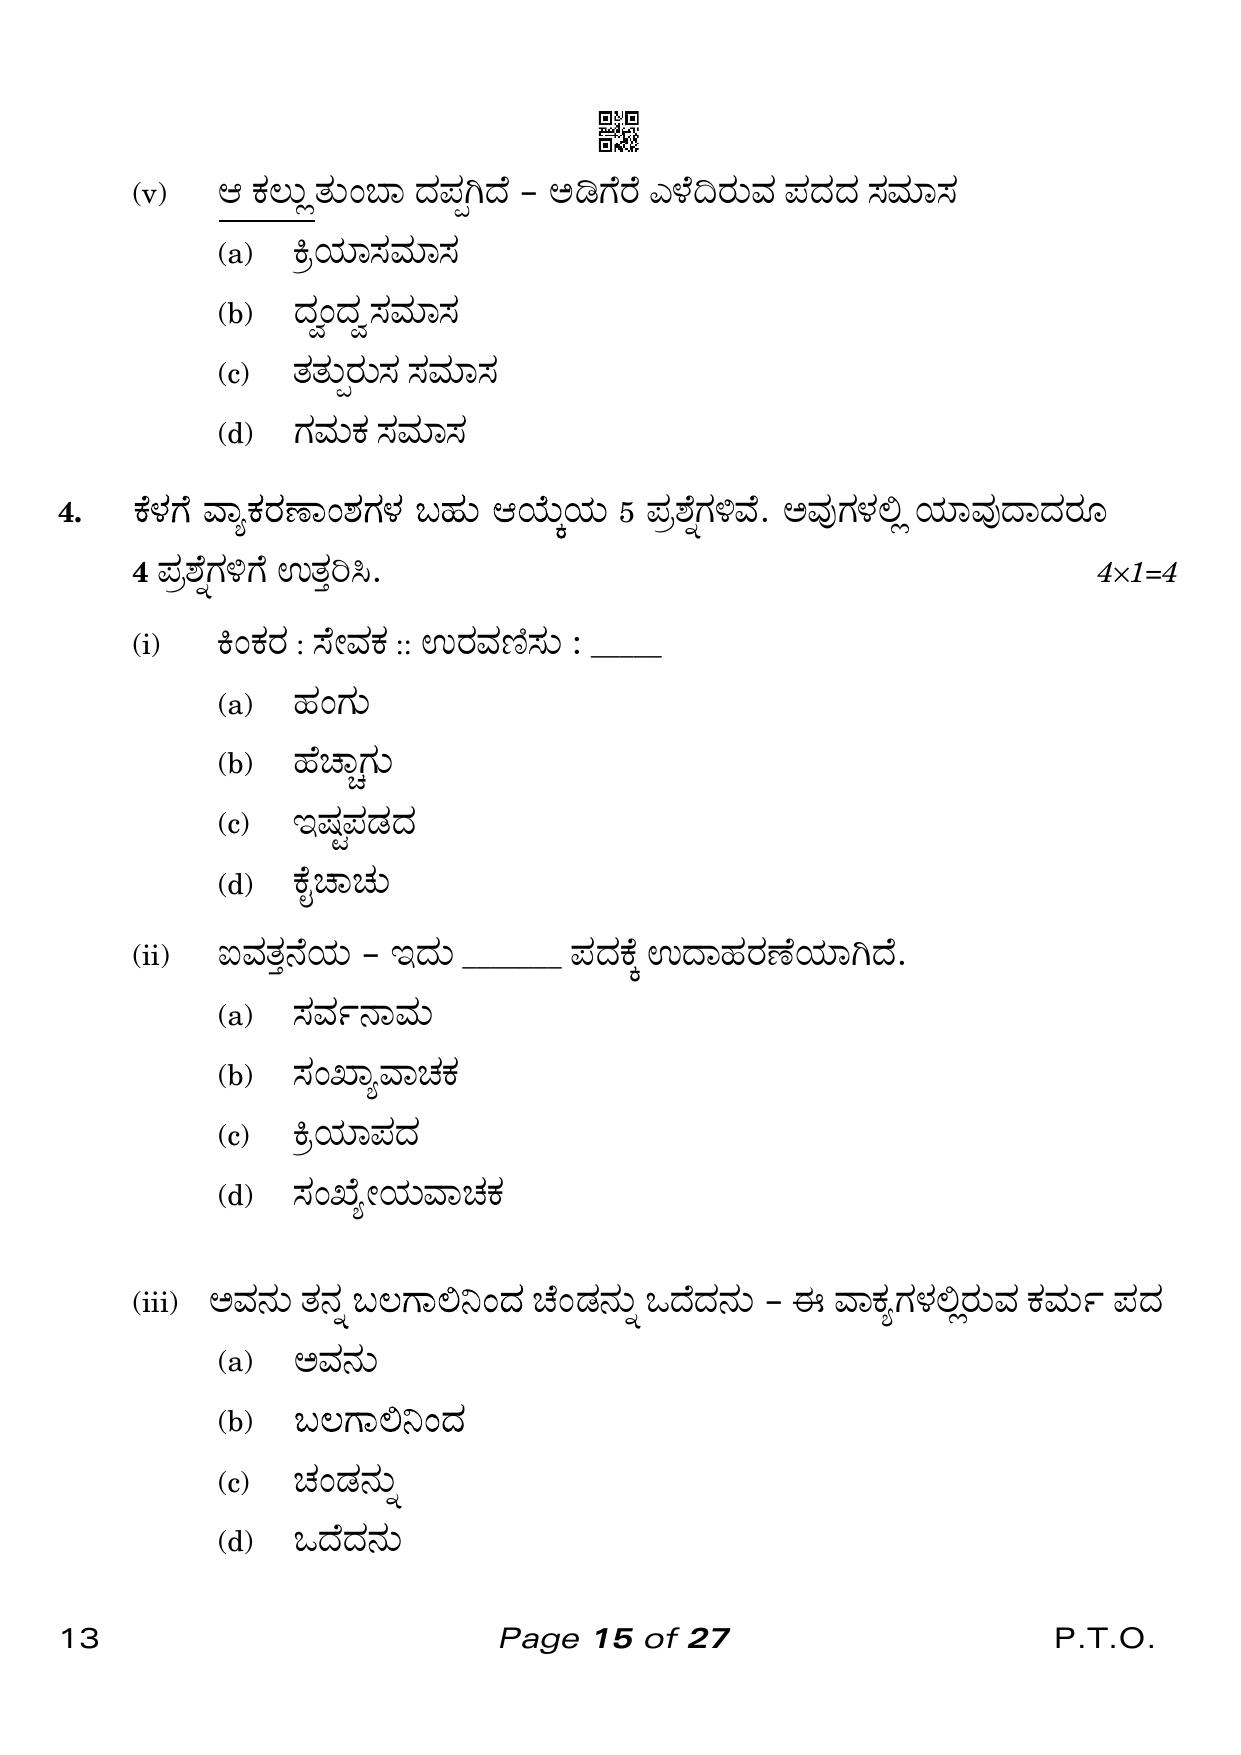 CBSE Class 10 Kannada (Compartment) 2023 Question Paper - Page 15